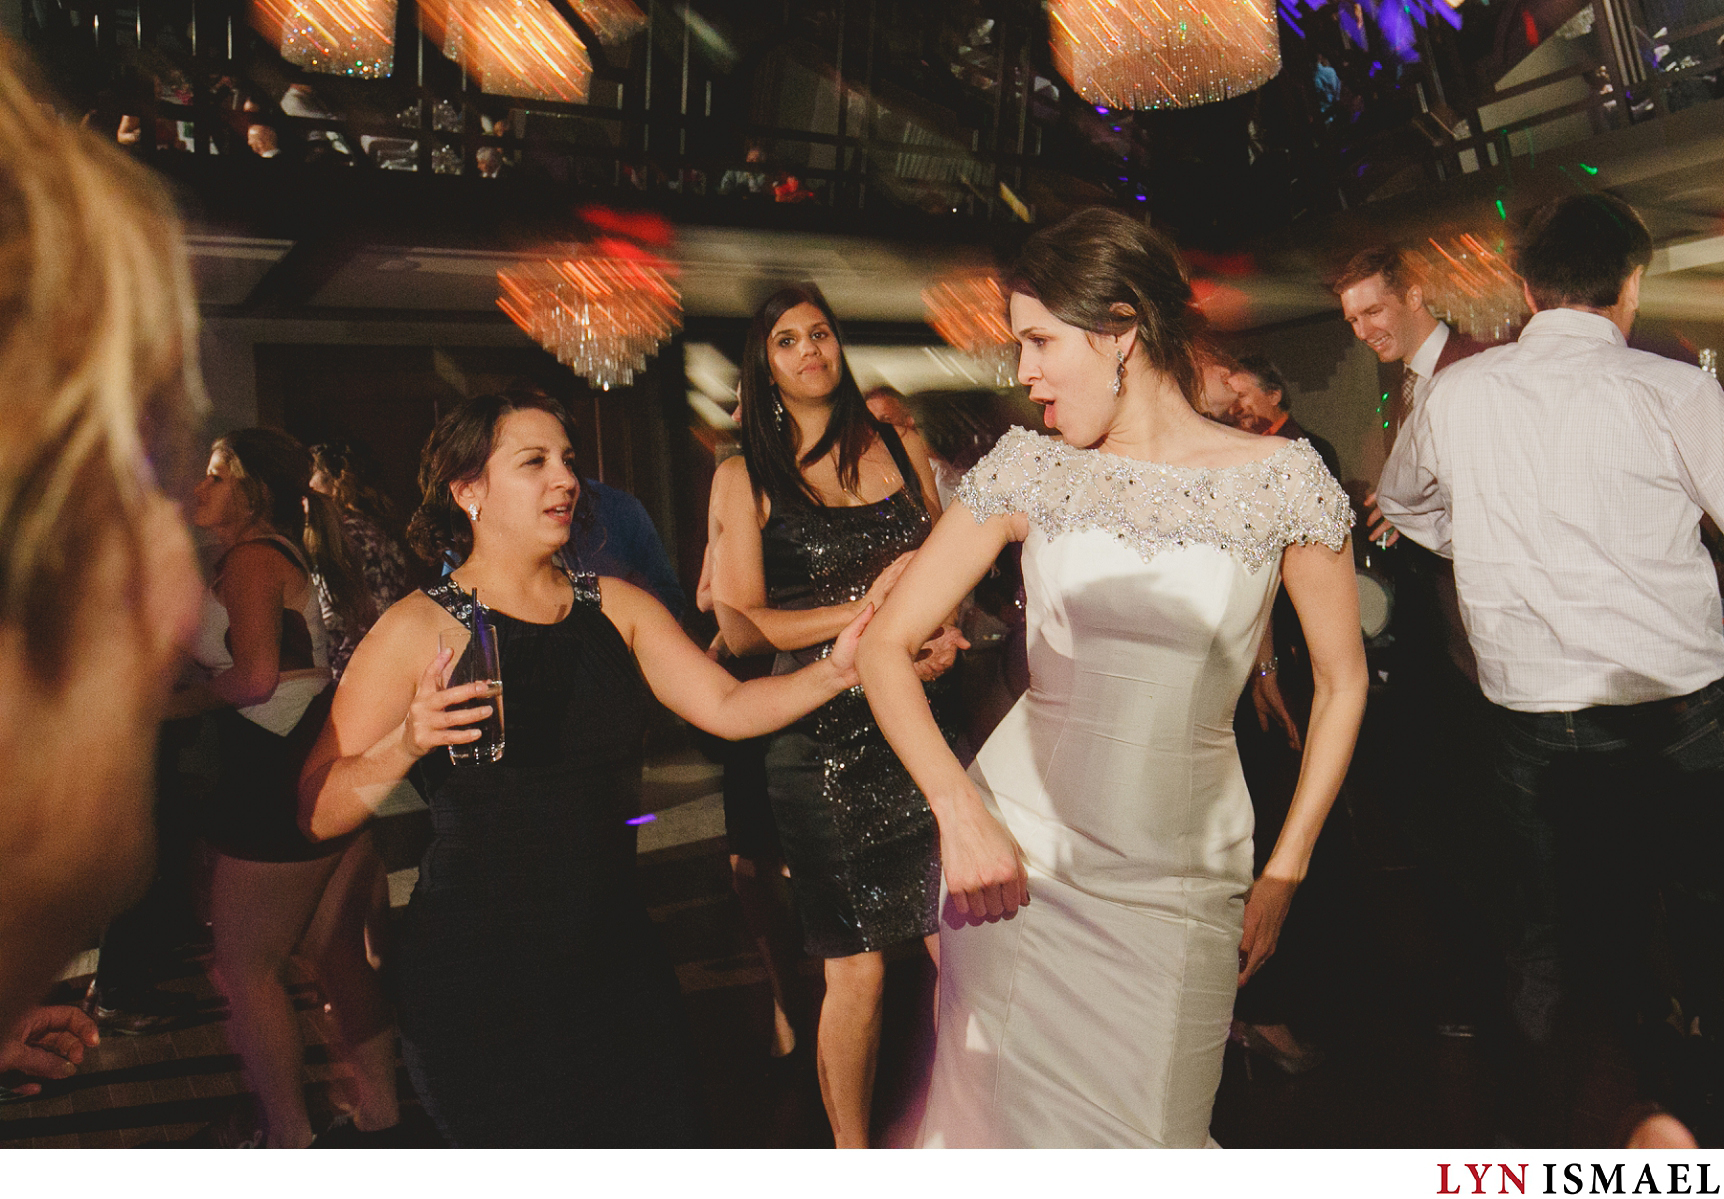 The bride dances with her friends at her wedding reception at Whistle Bear Golf Club